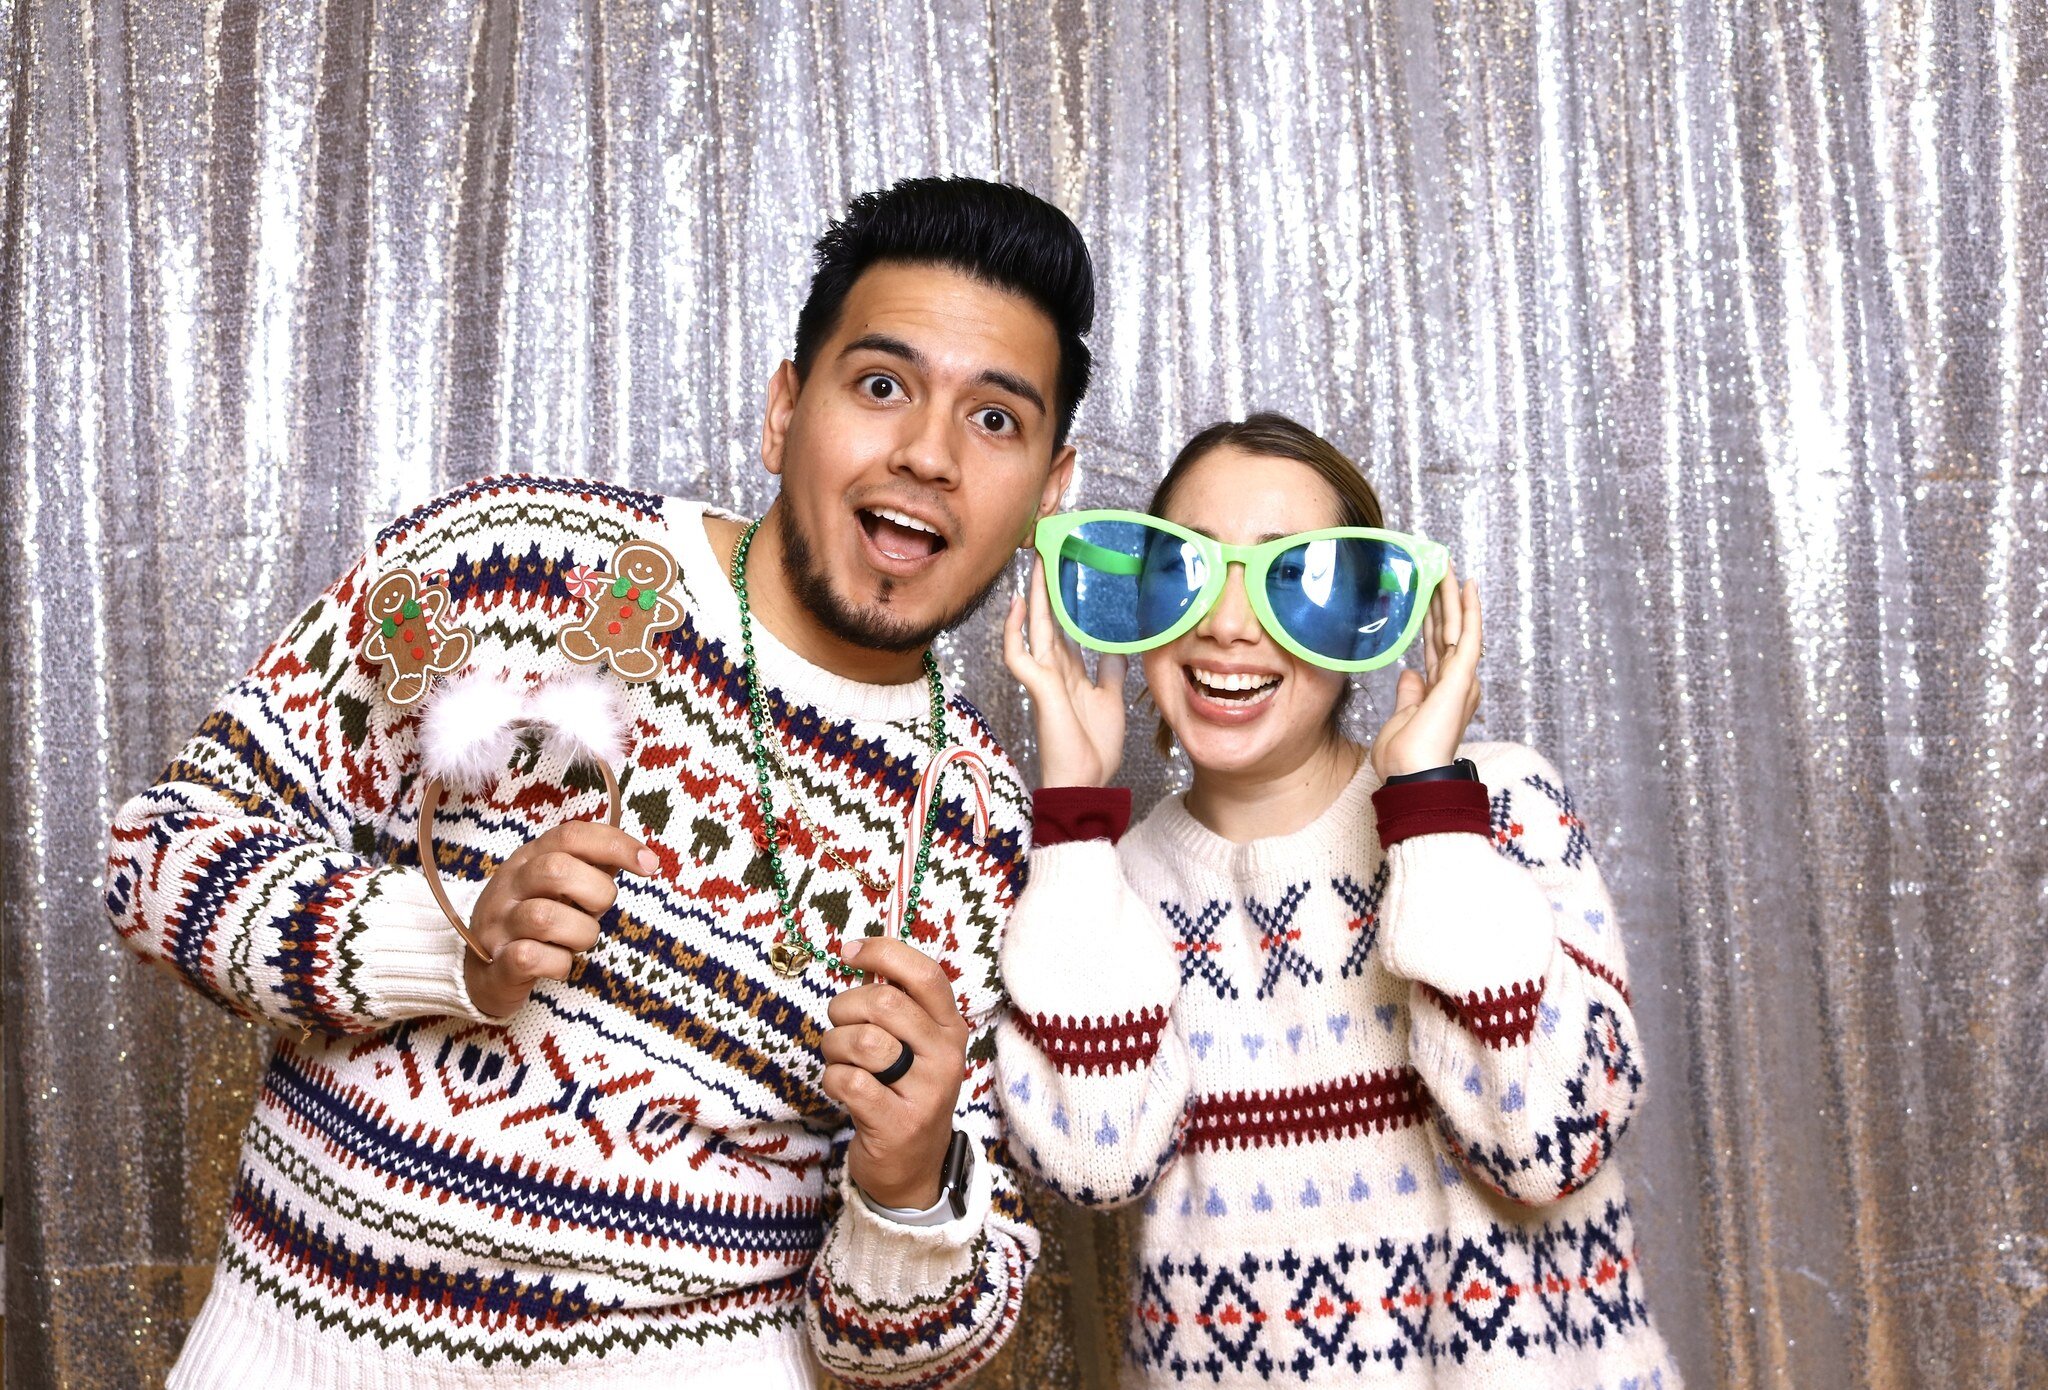 Don't wait last minute to get a photo booth for your holiday party!🎄 Book us today!🤩

Also don't forget about our photo booth giveaway! Enter for your chance to win! Giveaway post pinned on our profile. 

#crownphotobooths #okcphotobooth #tulsaphot